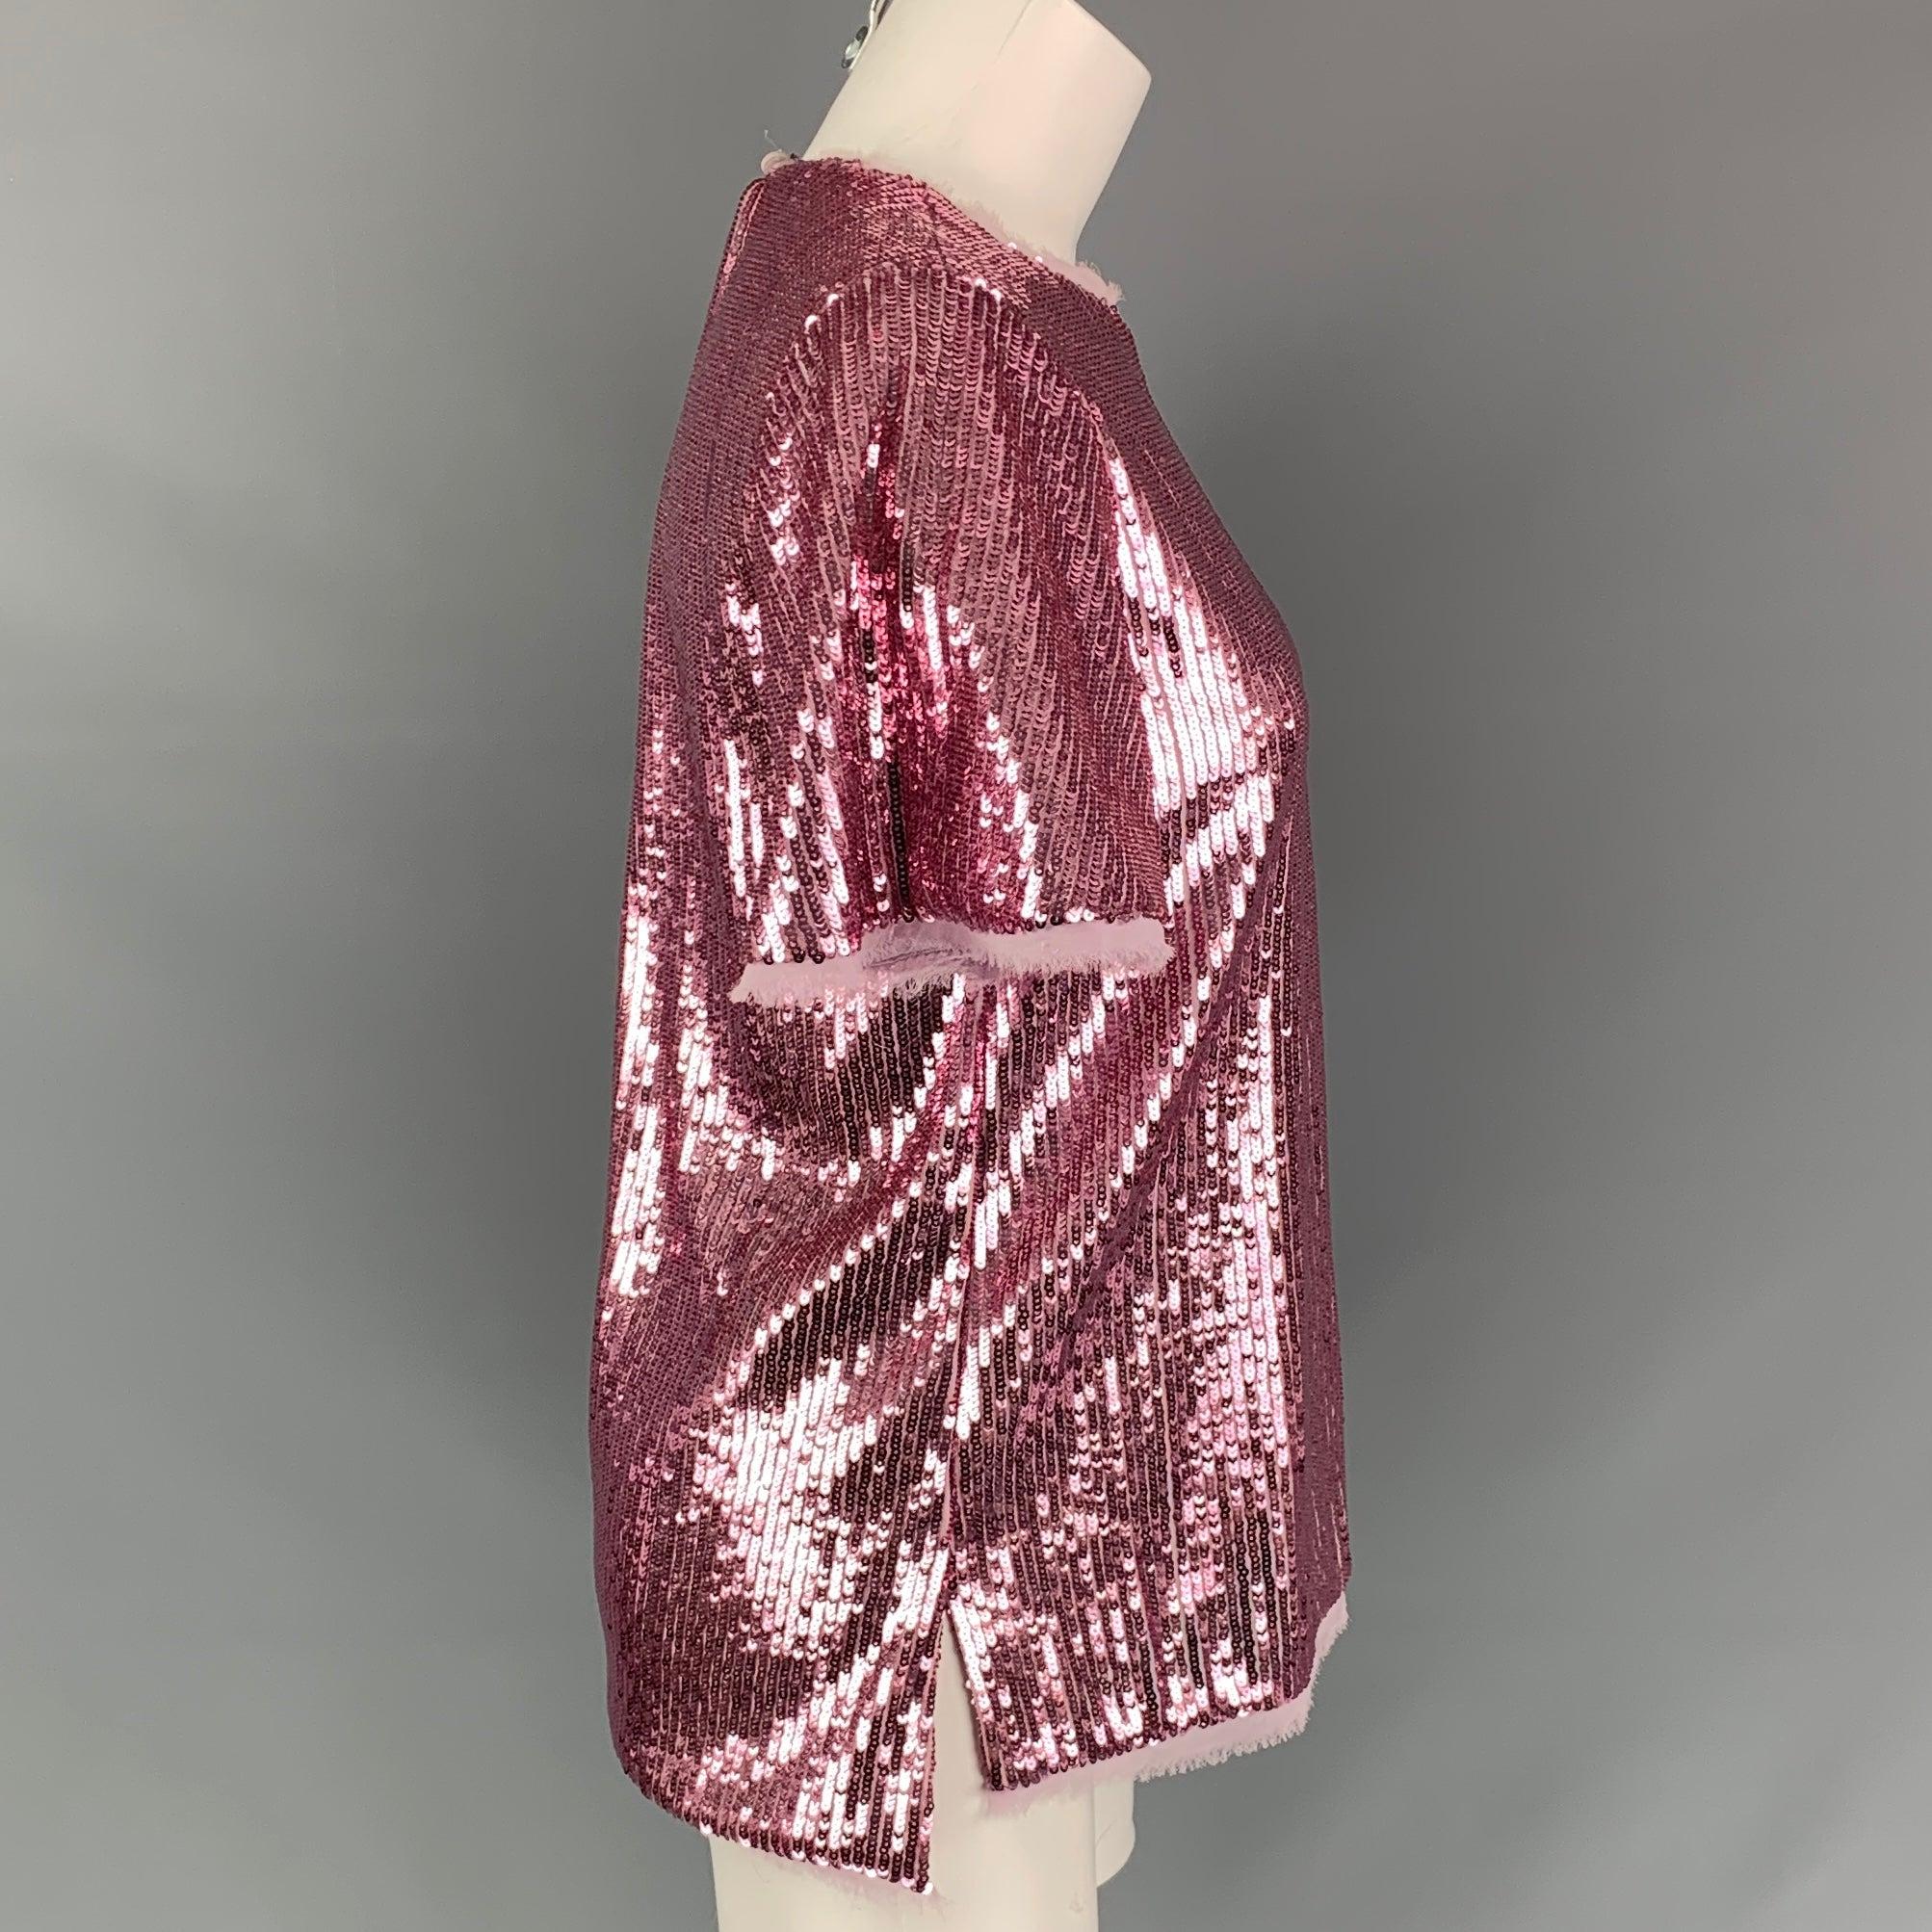 PRABAL GURUNG dress stop comes in a pink sequined polyester featuring a raw hem, side slits, and a single back button closure. Made in USA.
Excellent
Pre-Owned Condition. 

Marked:   0 

Measurements: 
 
Shoulder: 14.5 inches  Bust: 34 inches 